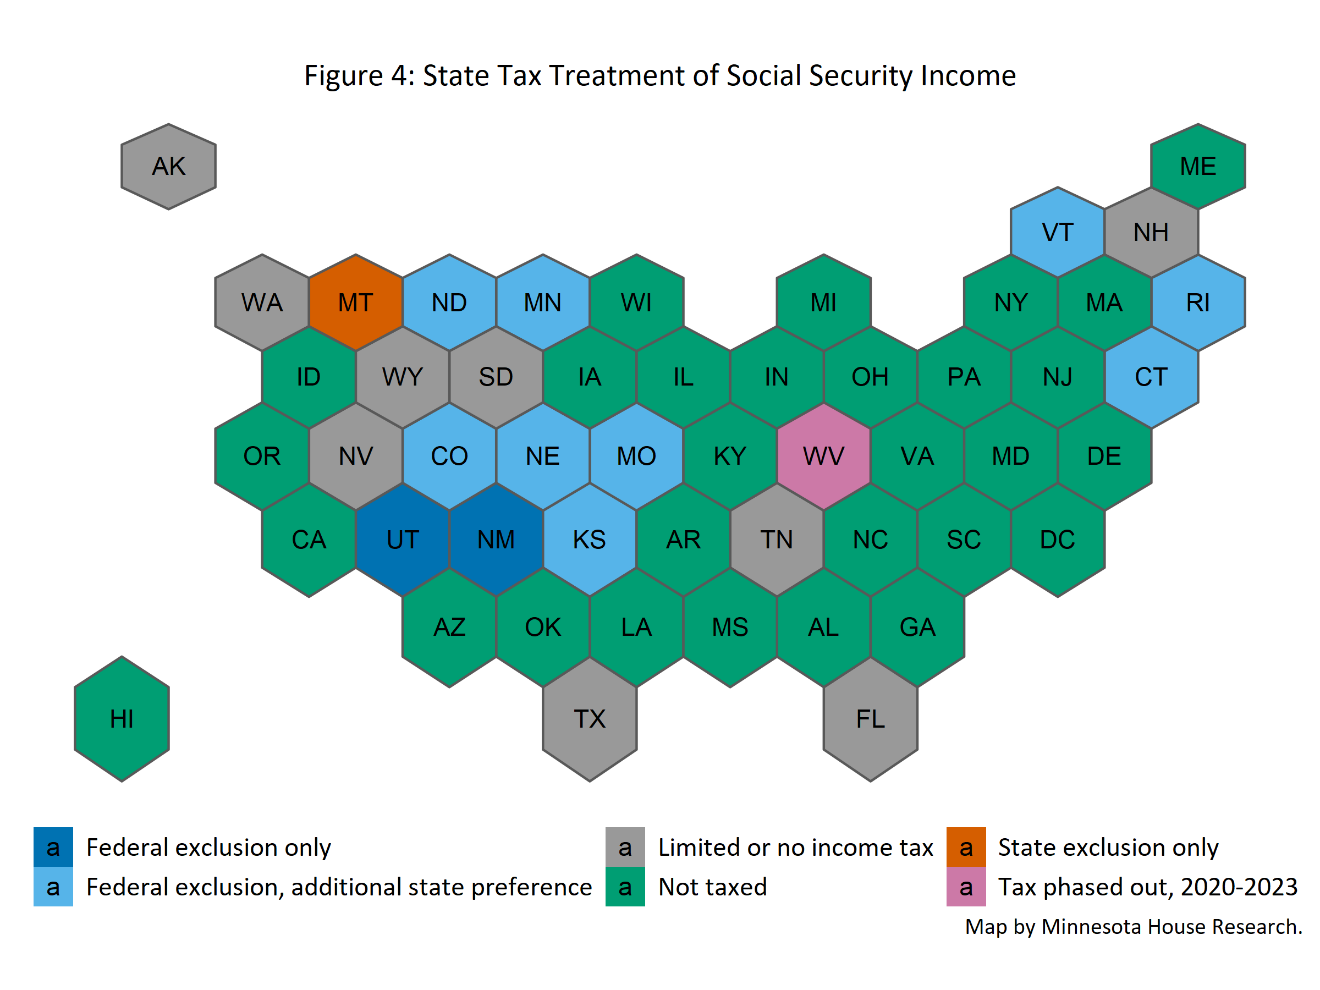 Graph for state tax treatment of social security income